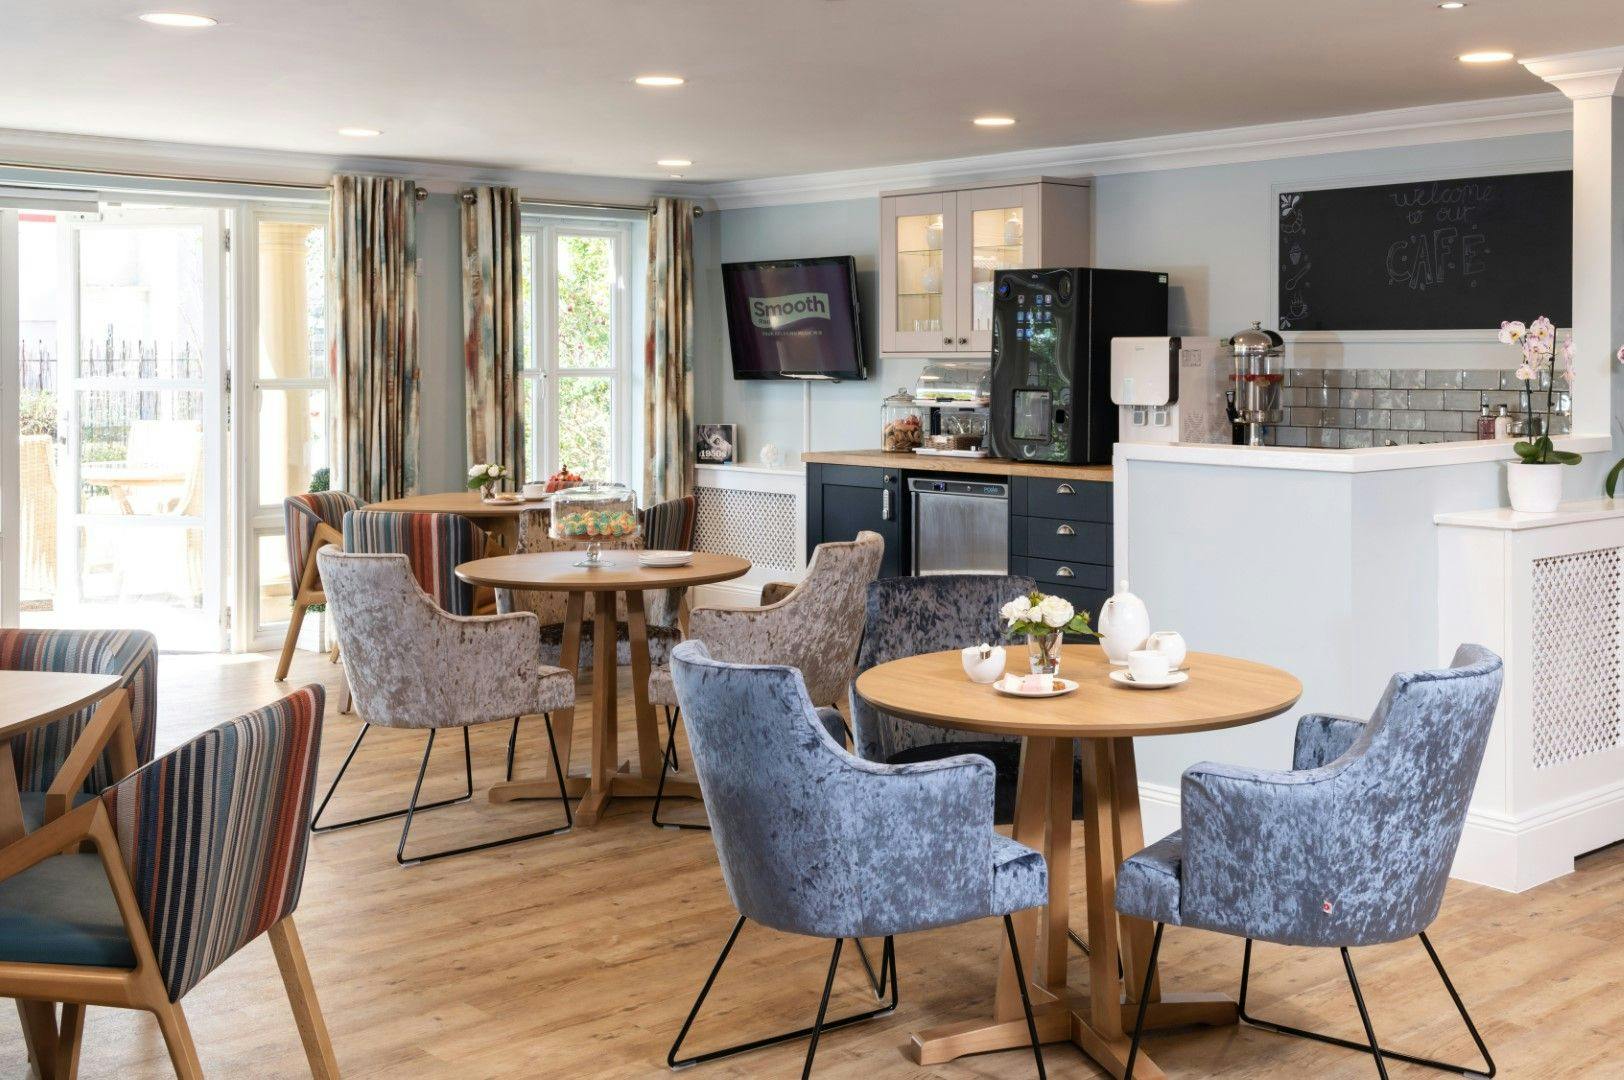 Dining Area at Admiral Court Care Home in Leigh-on-Sea, Southend-on-Sea